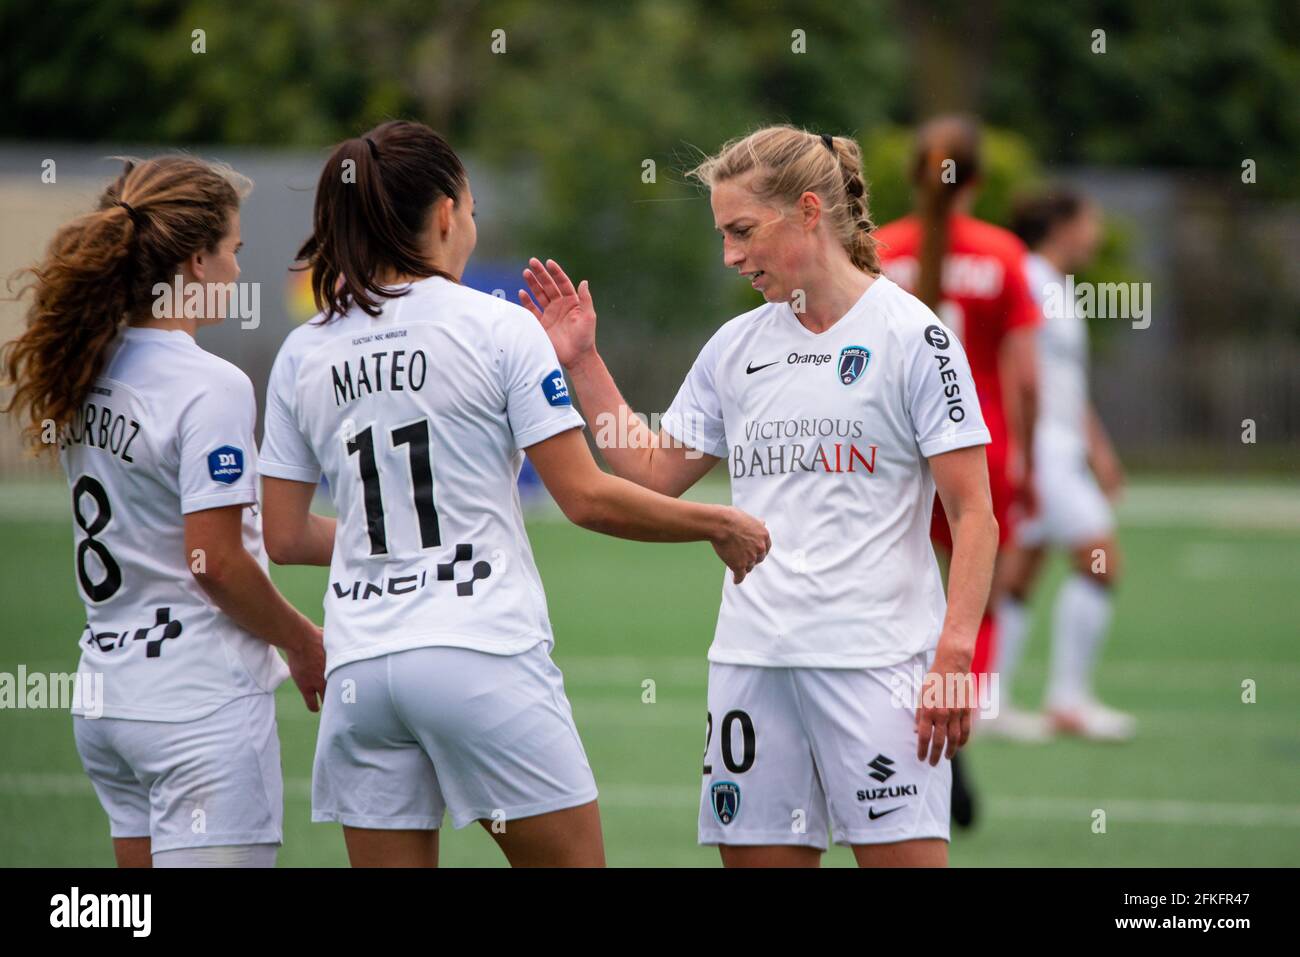 Boulogne-Billancourt, France, 1st May 2021, Daphne Corboz of Paris FC,  Clara Mateo of Paris FC and Linda Sallstrom of Paris FC celebrate the  victory after the Women's French championship D1 Arkema football